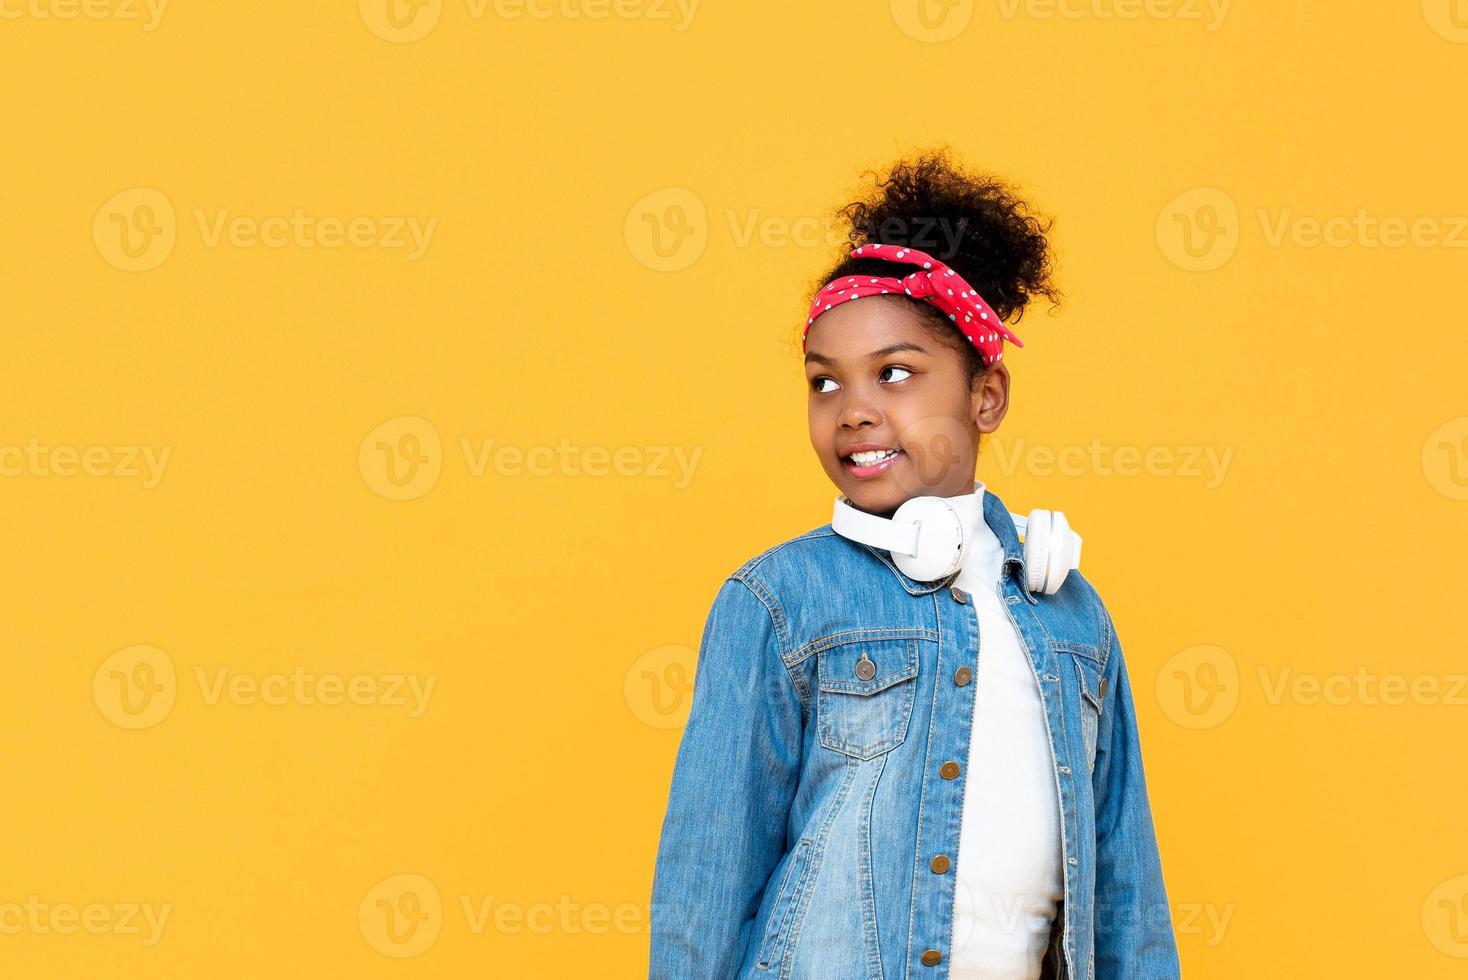 Smiling fashionable mixed raced African girl looking at copy space aside studio shot isolateded on colorful yellow background photo